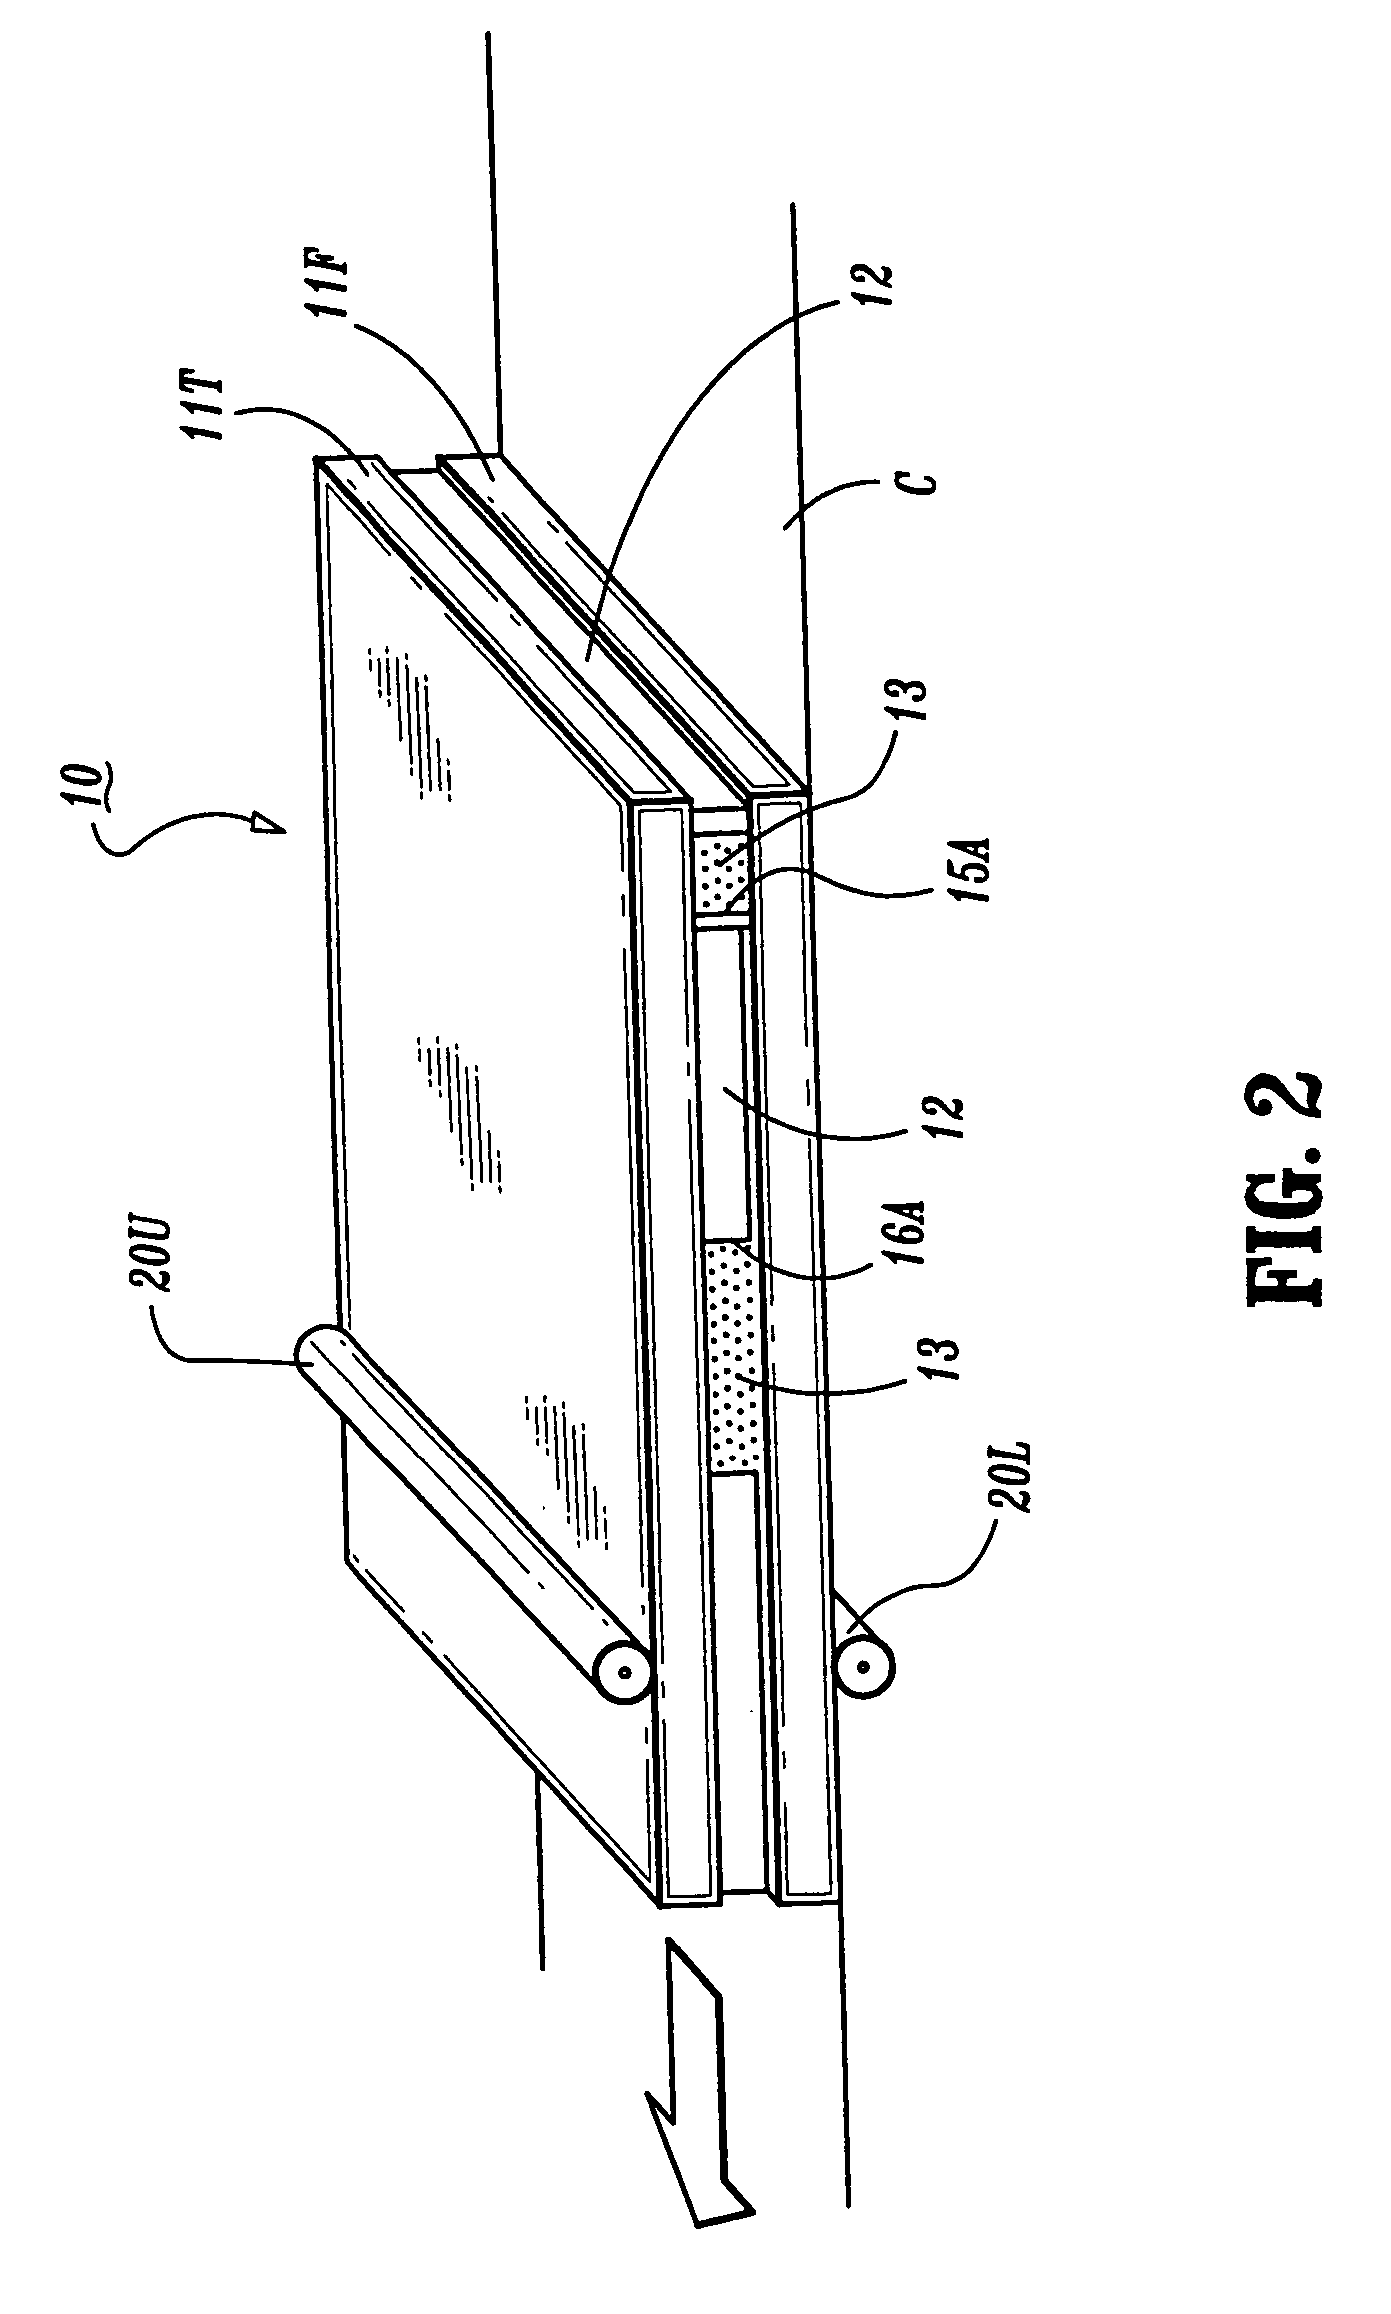 Liquid crystal cell, display device, and particular method of fabricating liquid crystal cell by dropping and capillary action